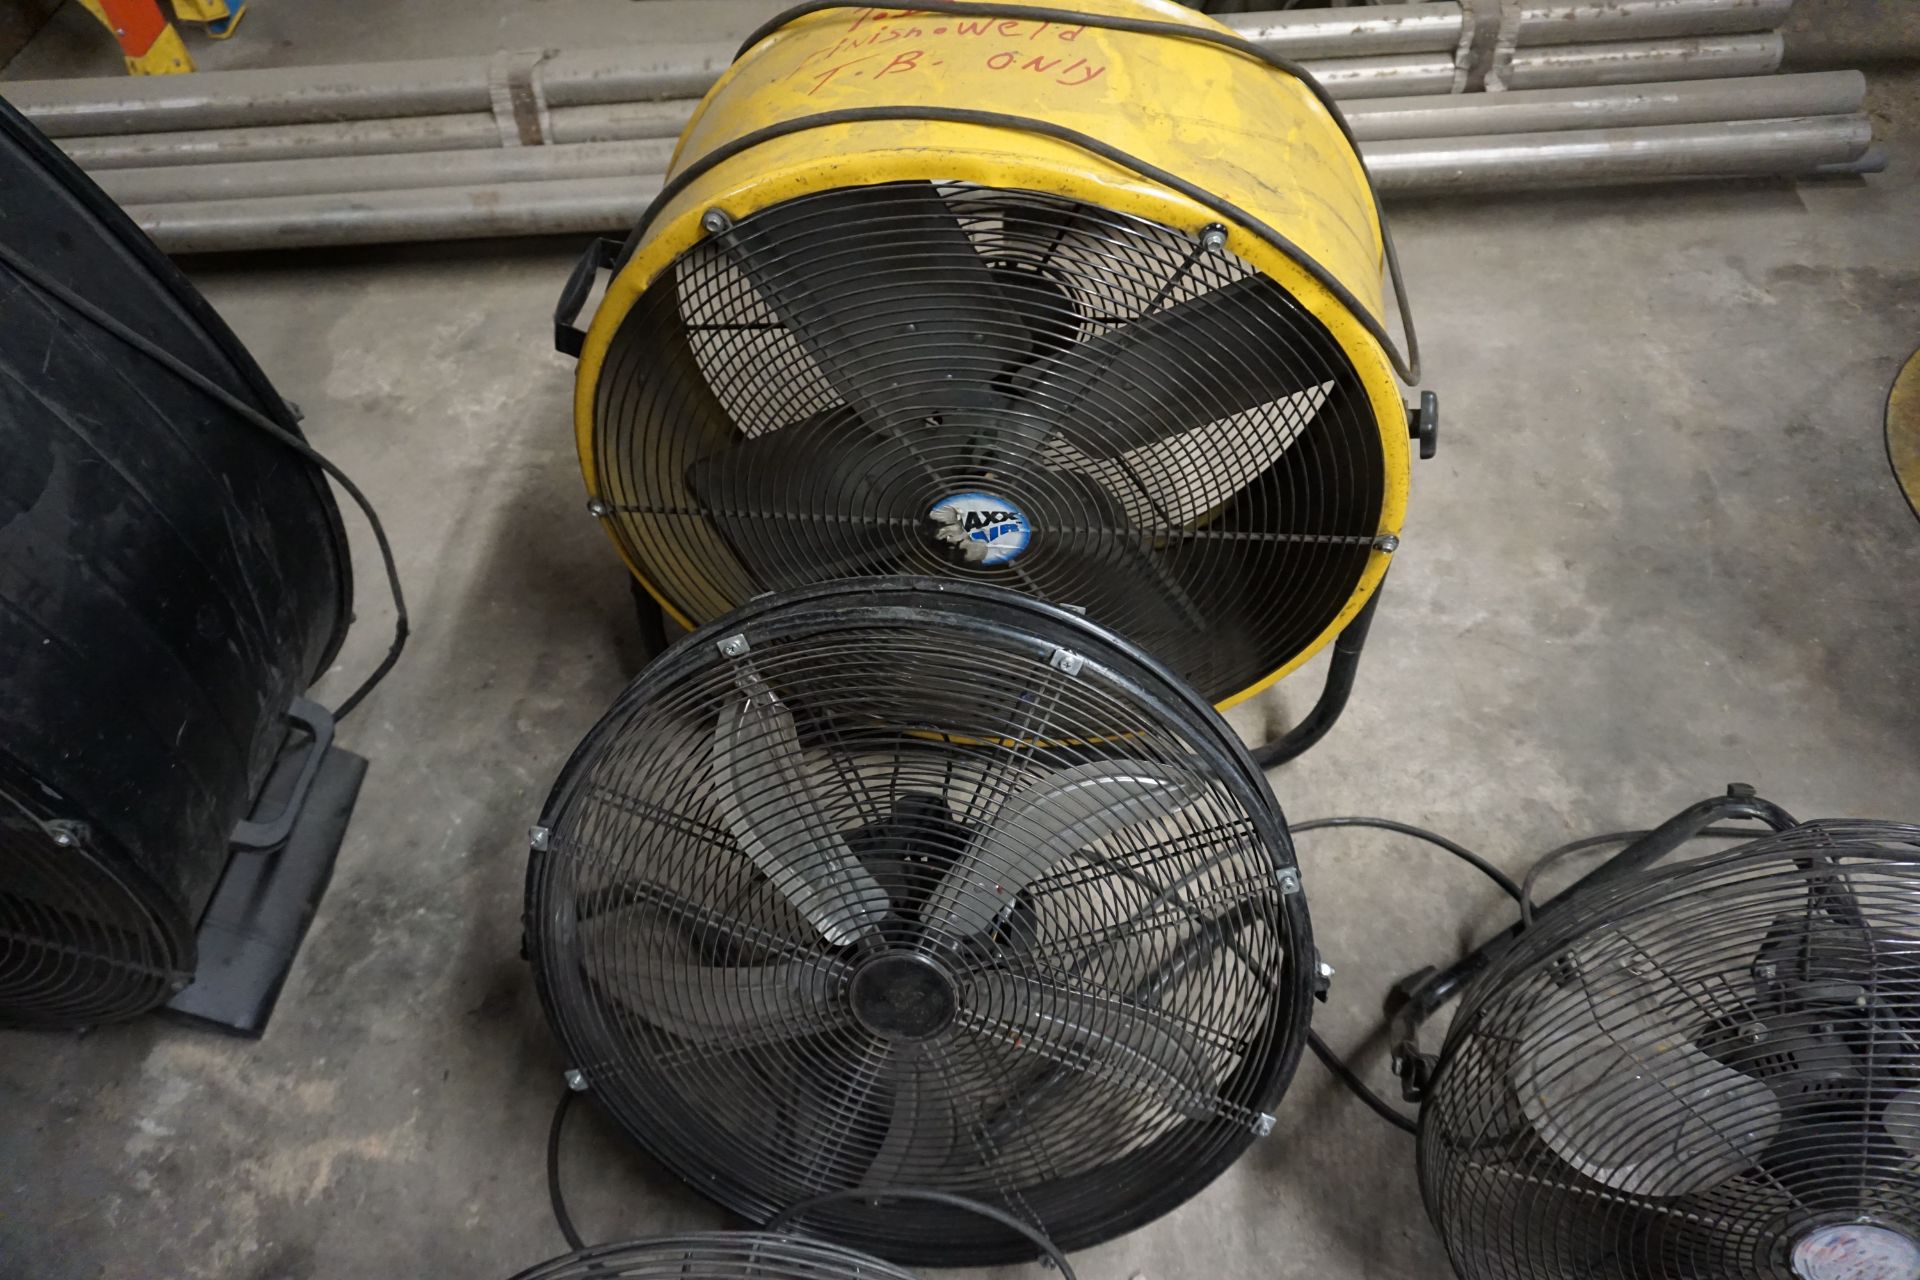 Shop Fans, (4) 18", (1) 24" (LOCATION: 3421 N Sylvania Ave, Ft Worth TX 76111) - Image 2 of 2